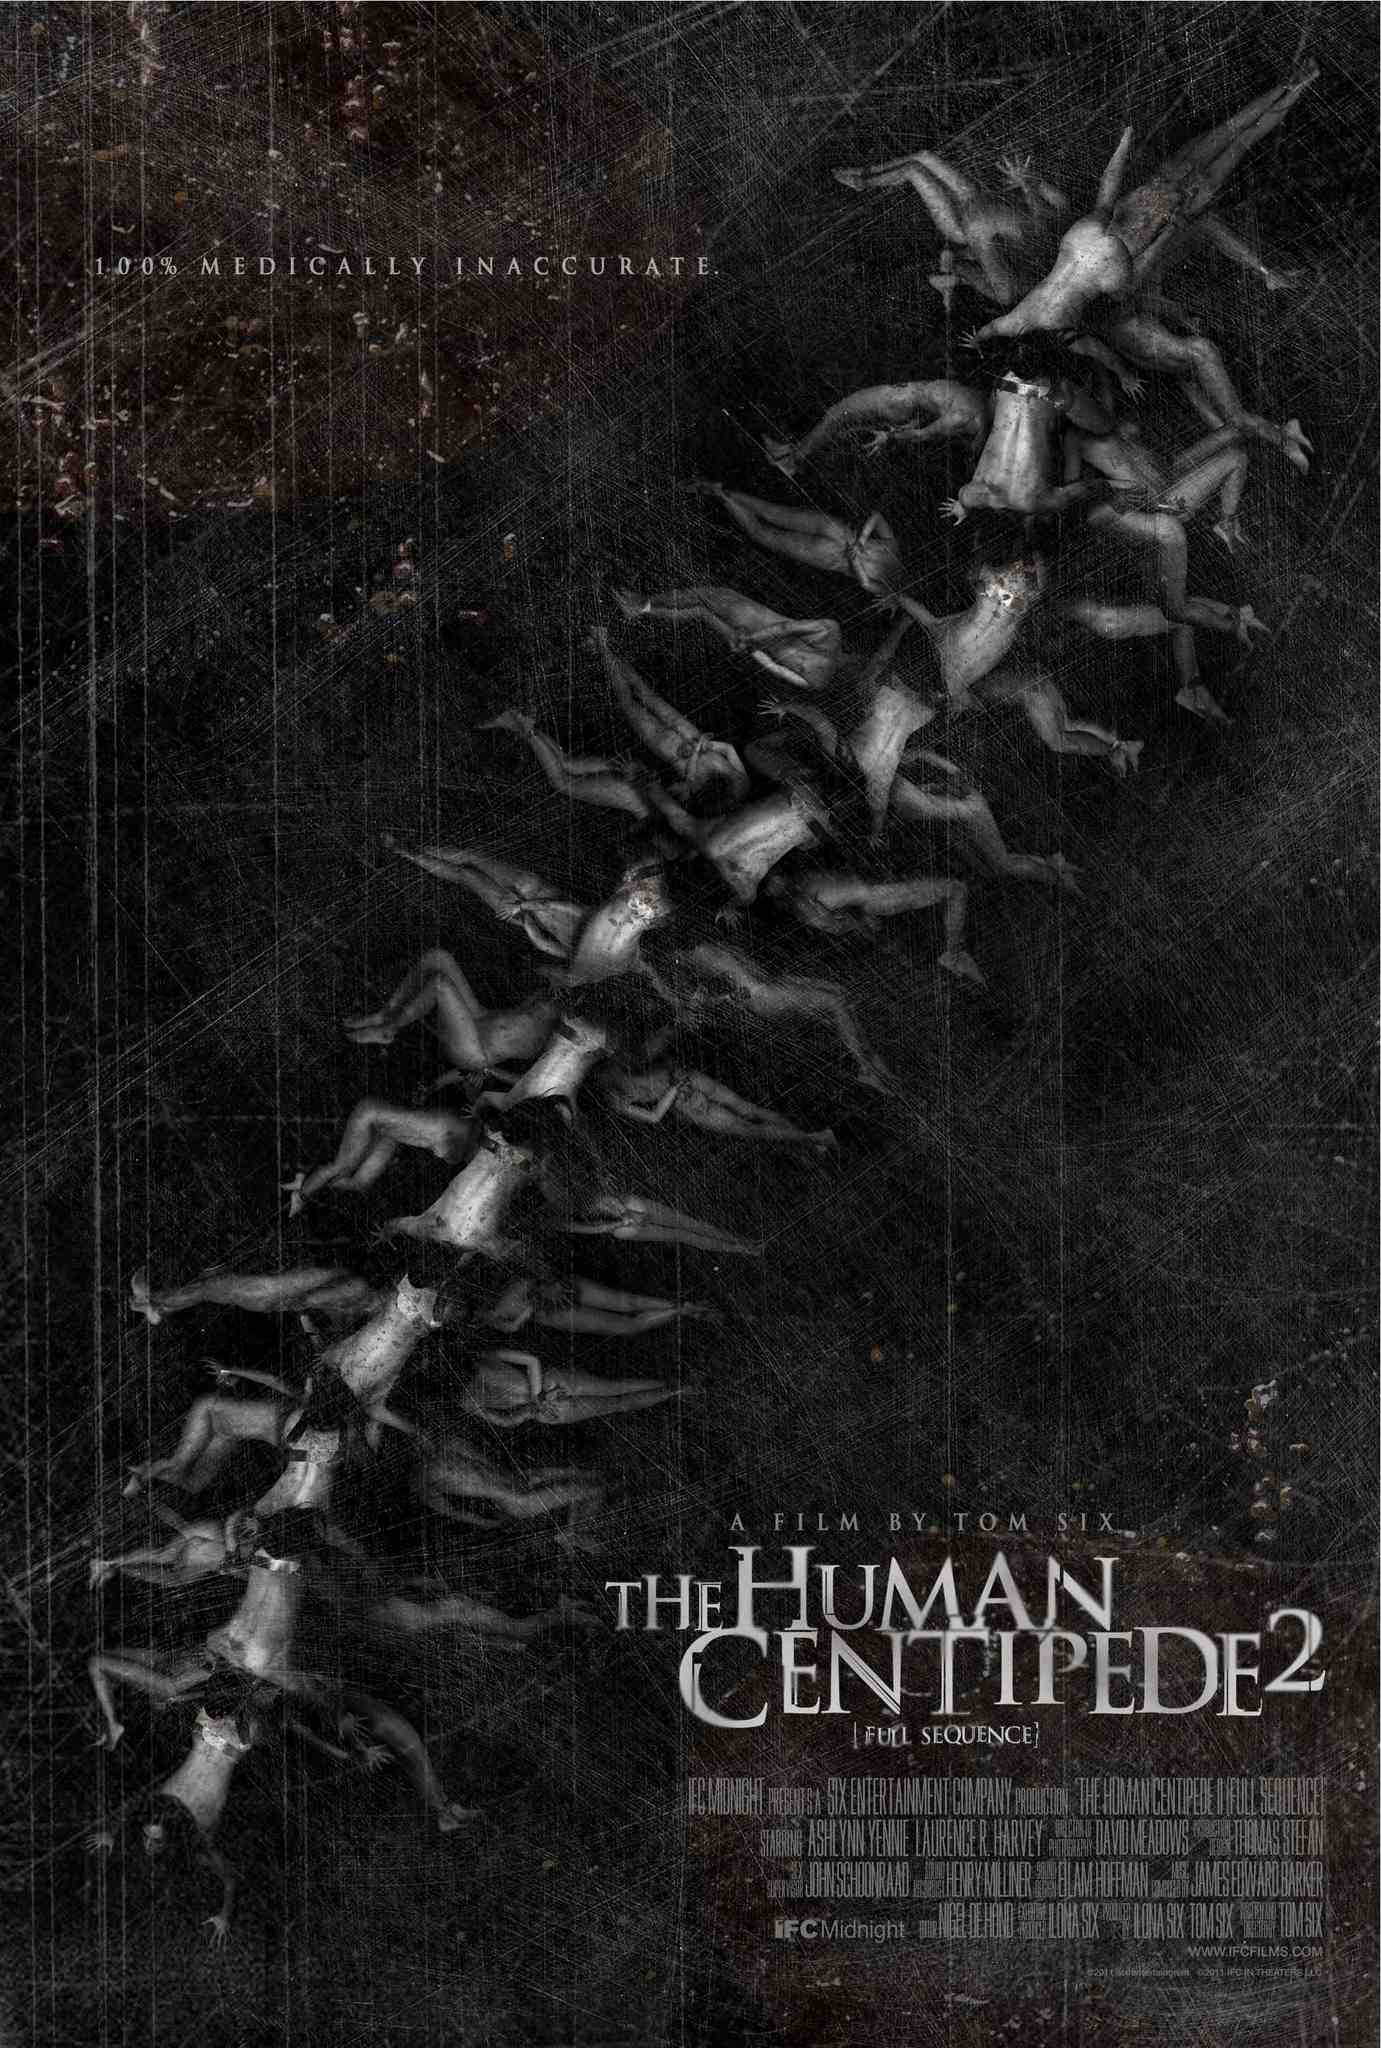 chelsea ordonez recommends The Human Centipede Download